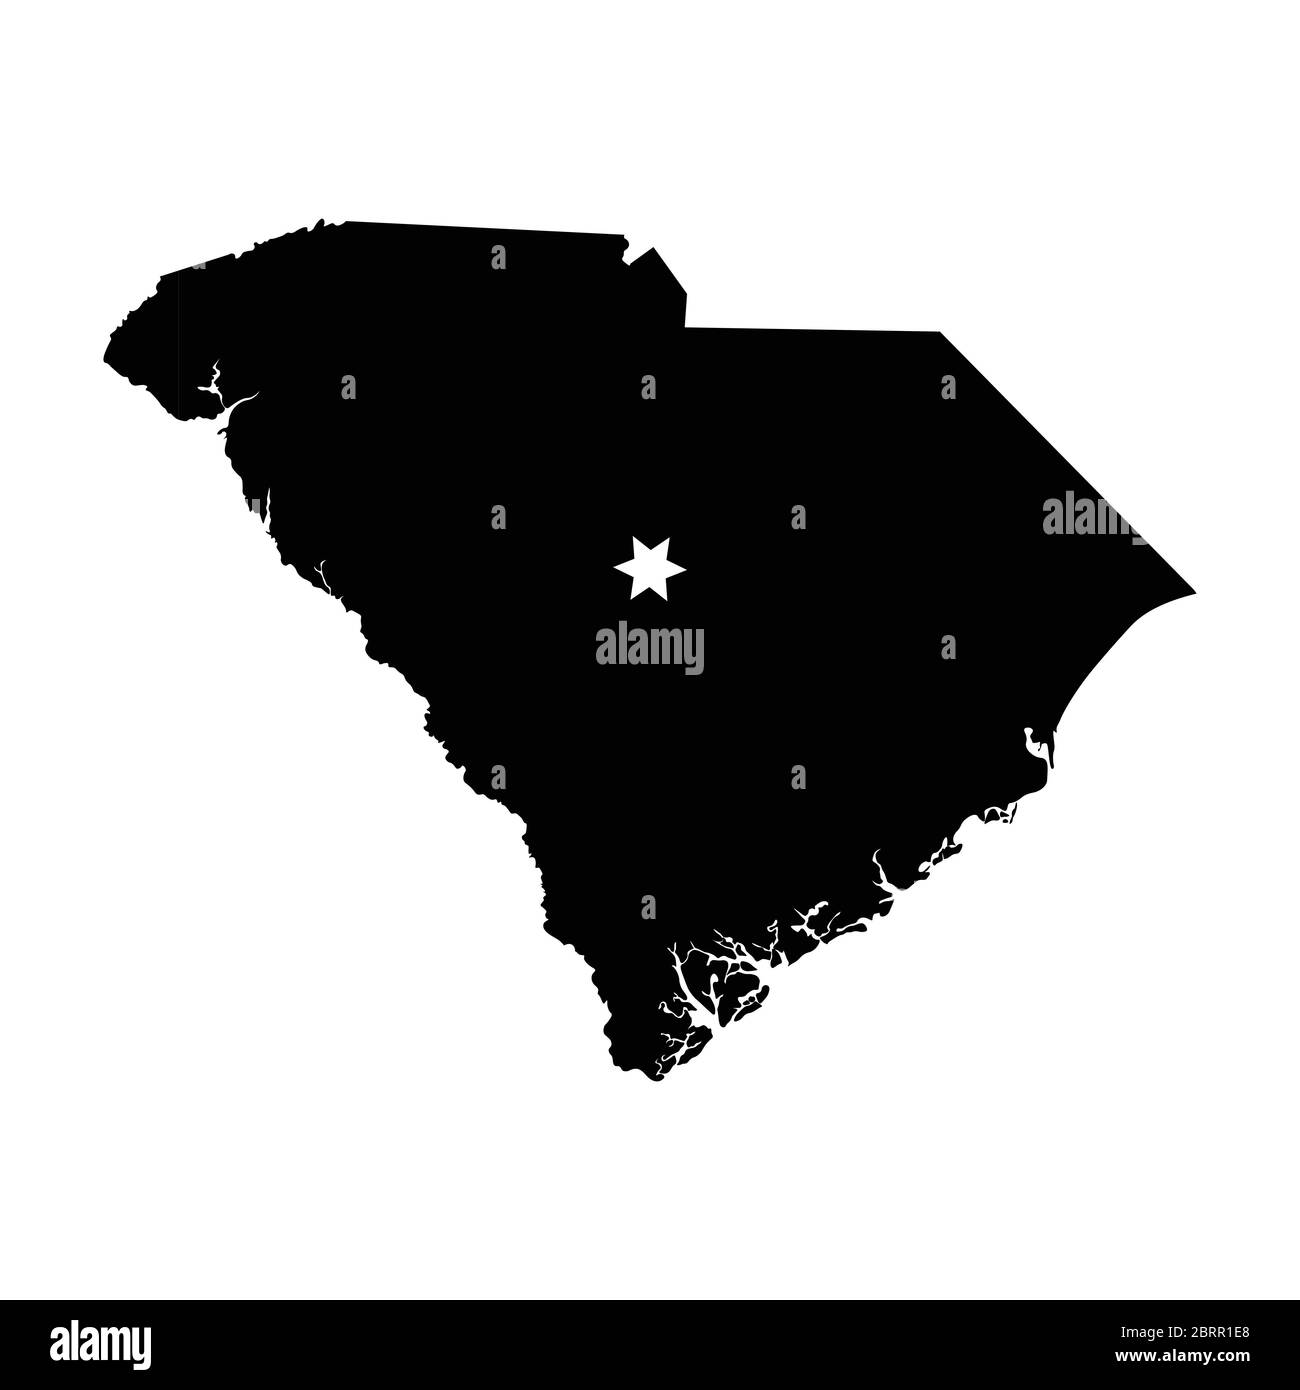 South Carolina SC state Map USA with Capital City Star at Columbia. Black silhouette and outline isolated maps on a white background. EPS Vector Stock Vector